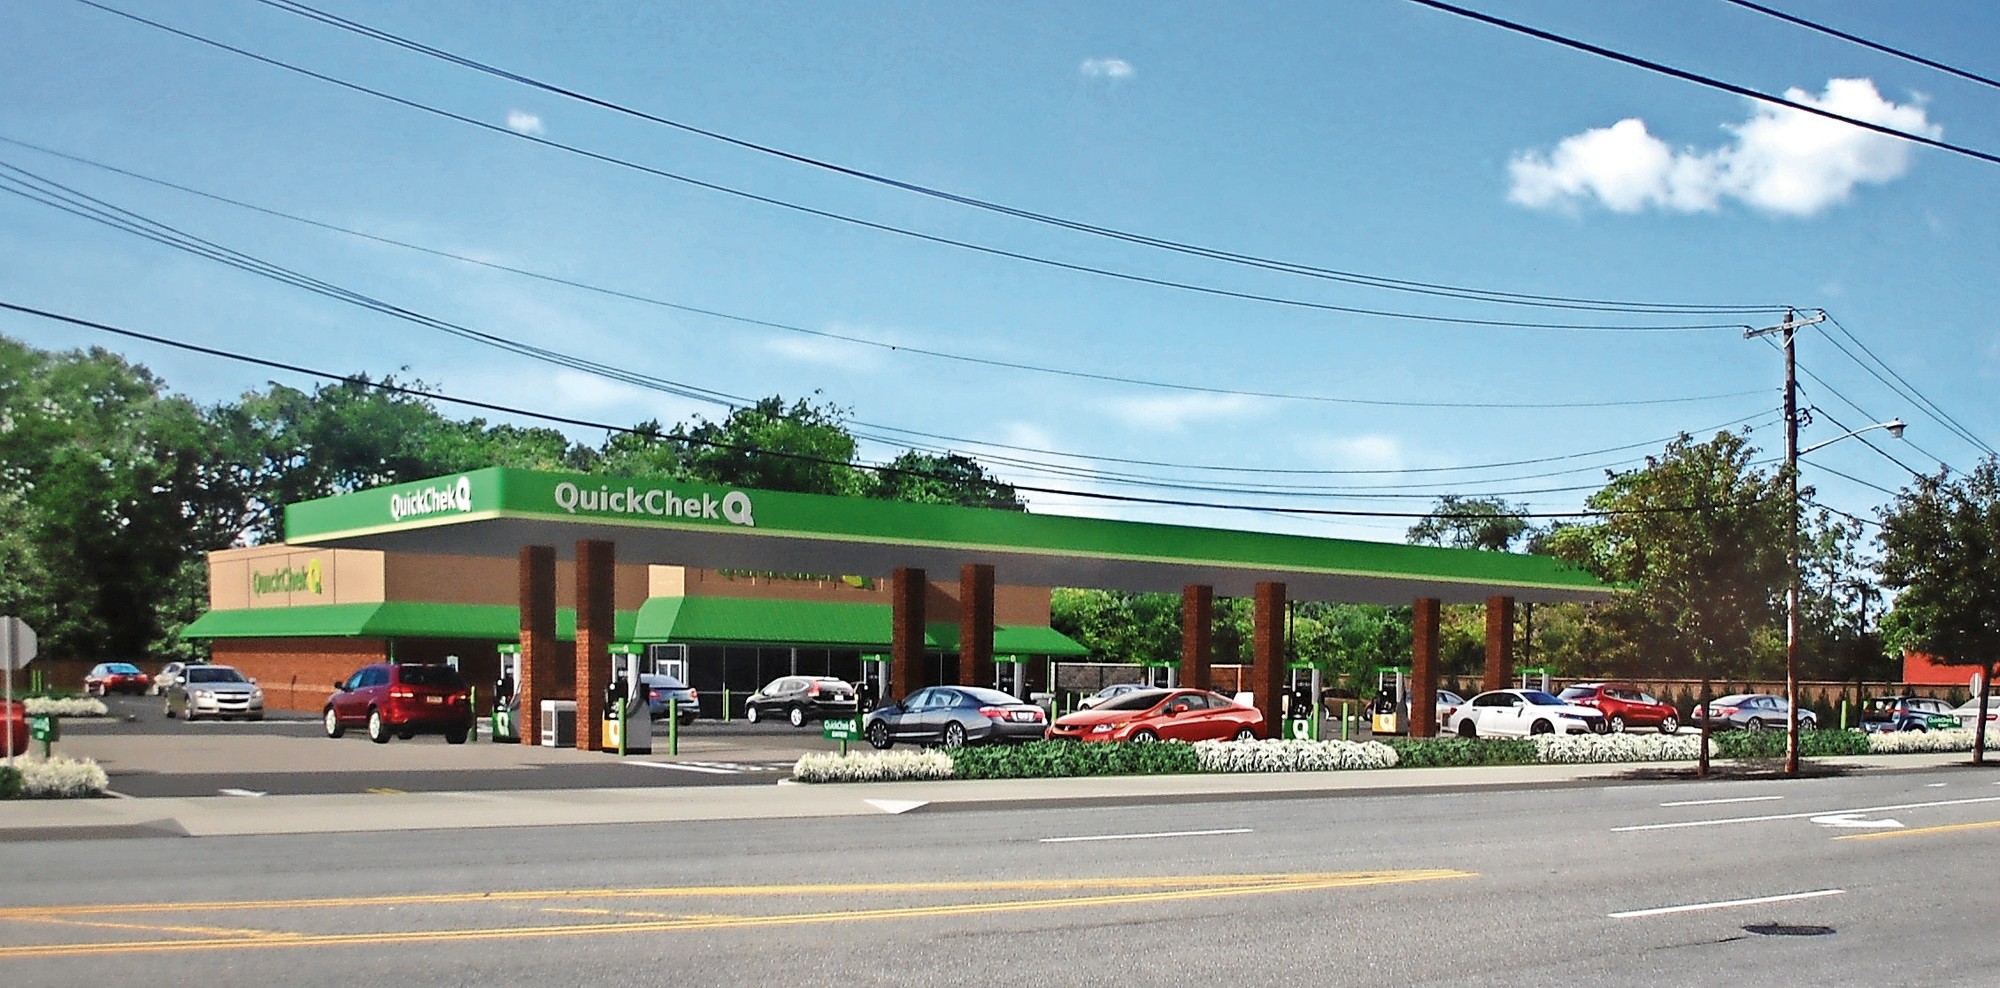 Plans for a QuickChek gas station and convenience store on Merrick Road in Seaford have been withdrawn.